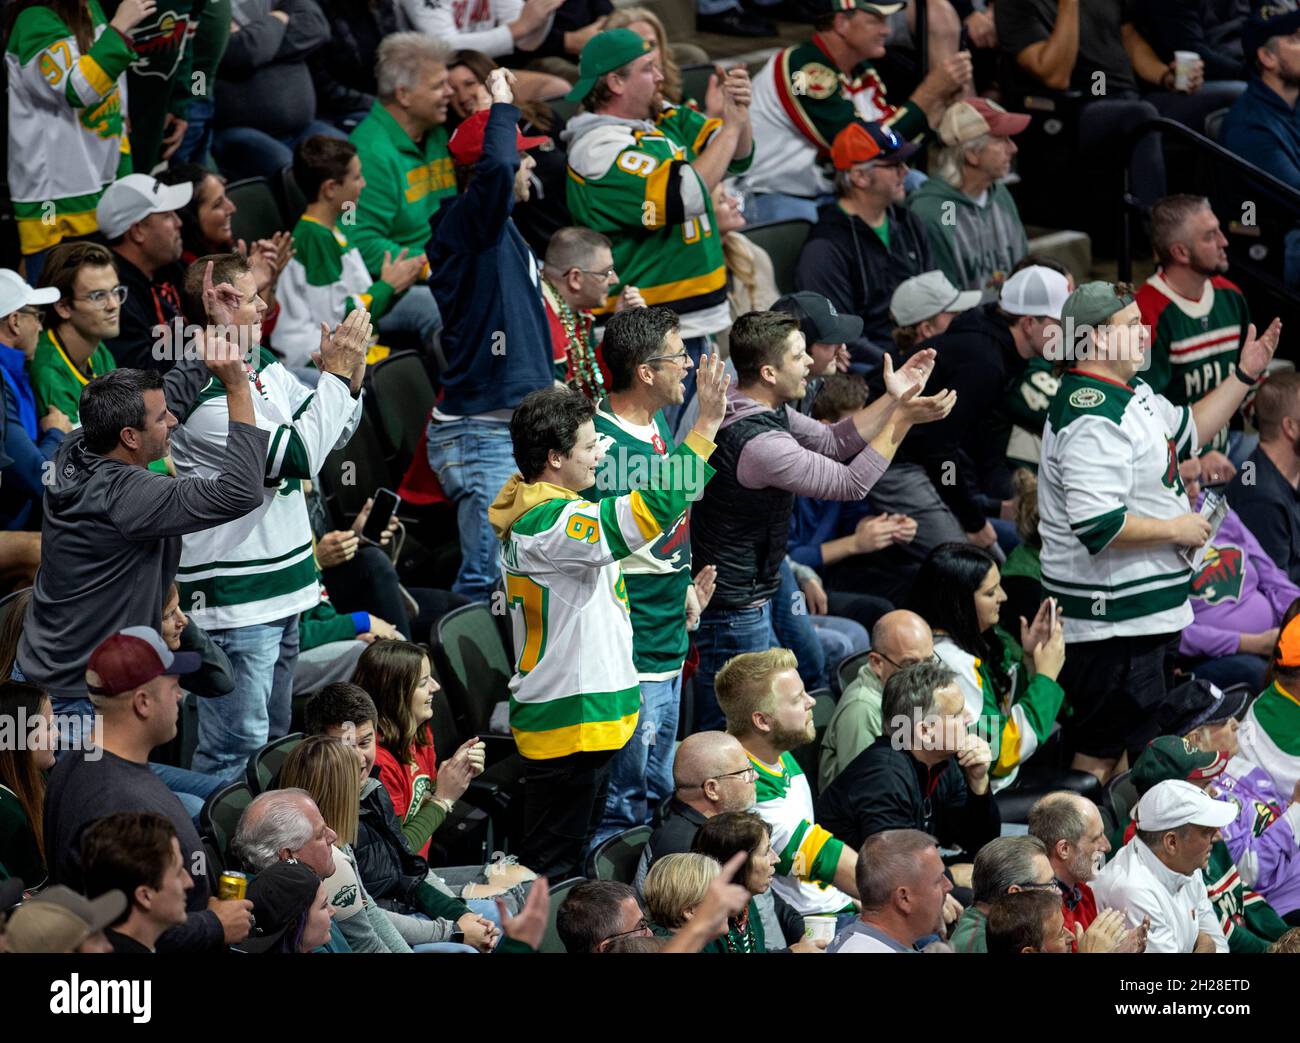 Curious about Center Section at Xcel Energy Center, with